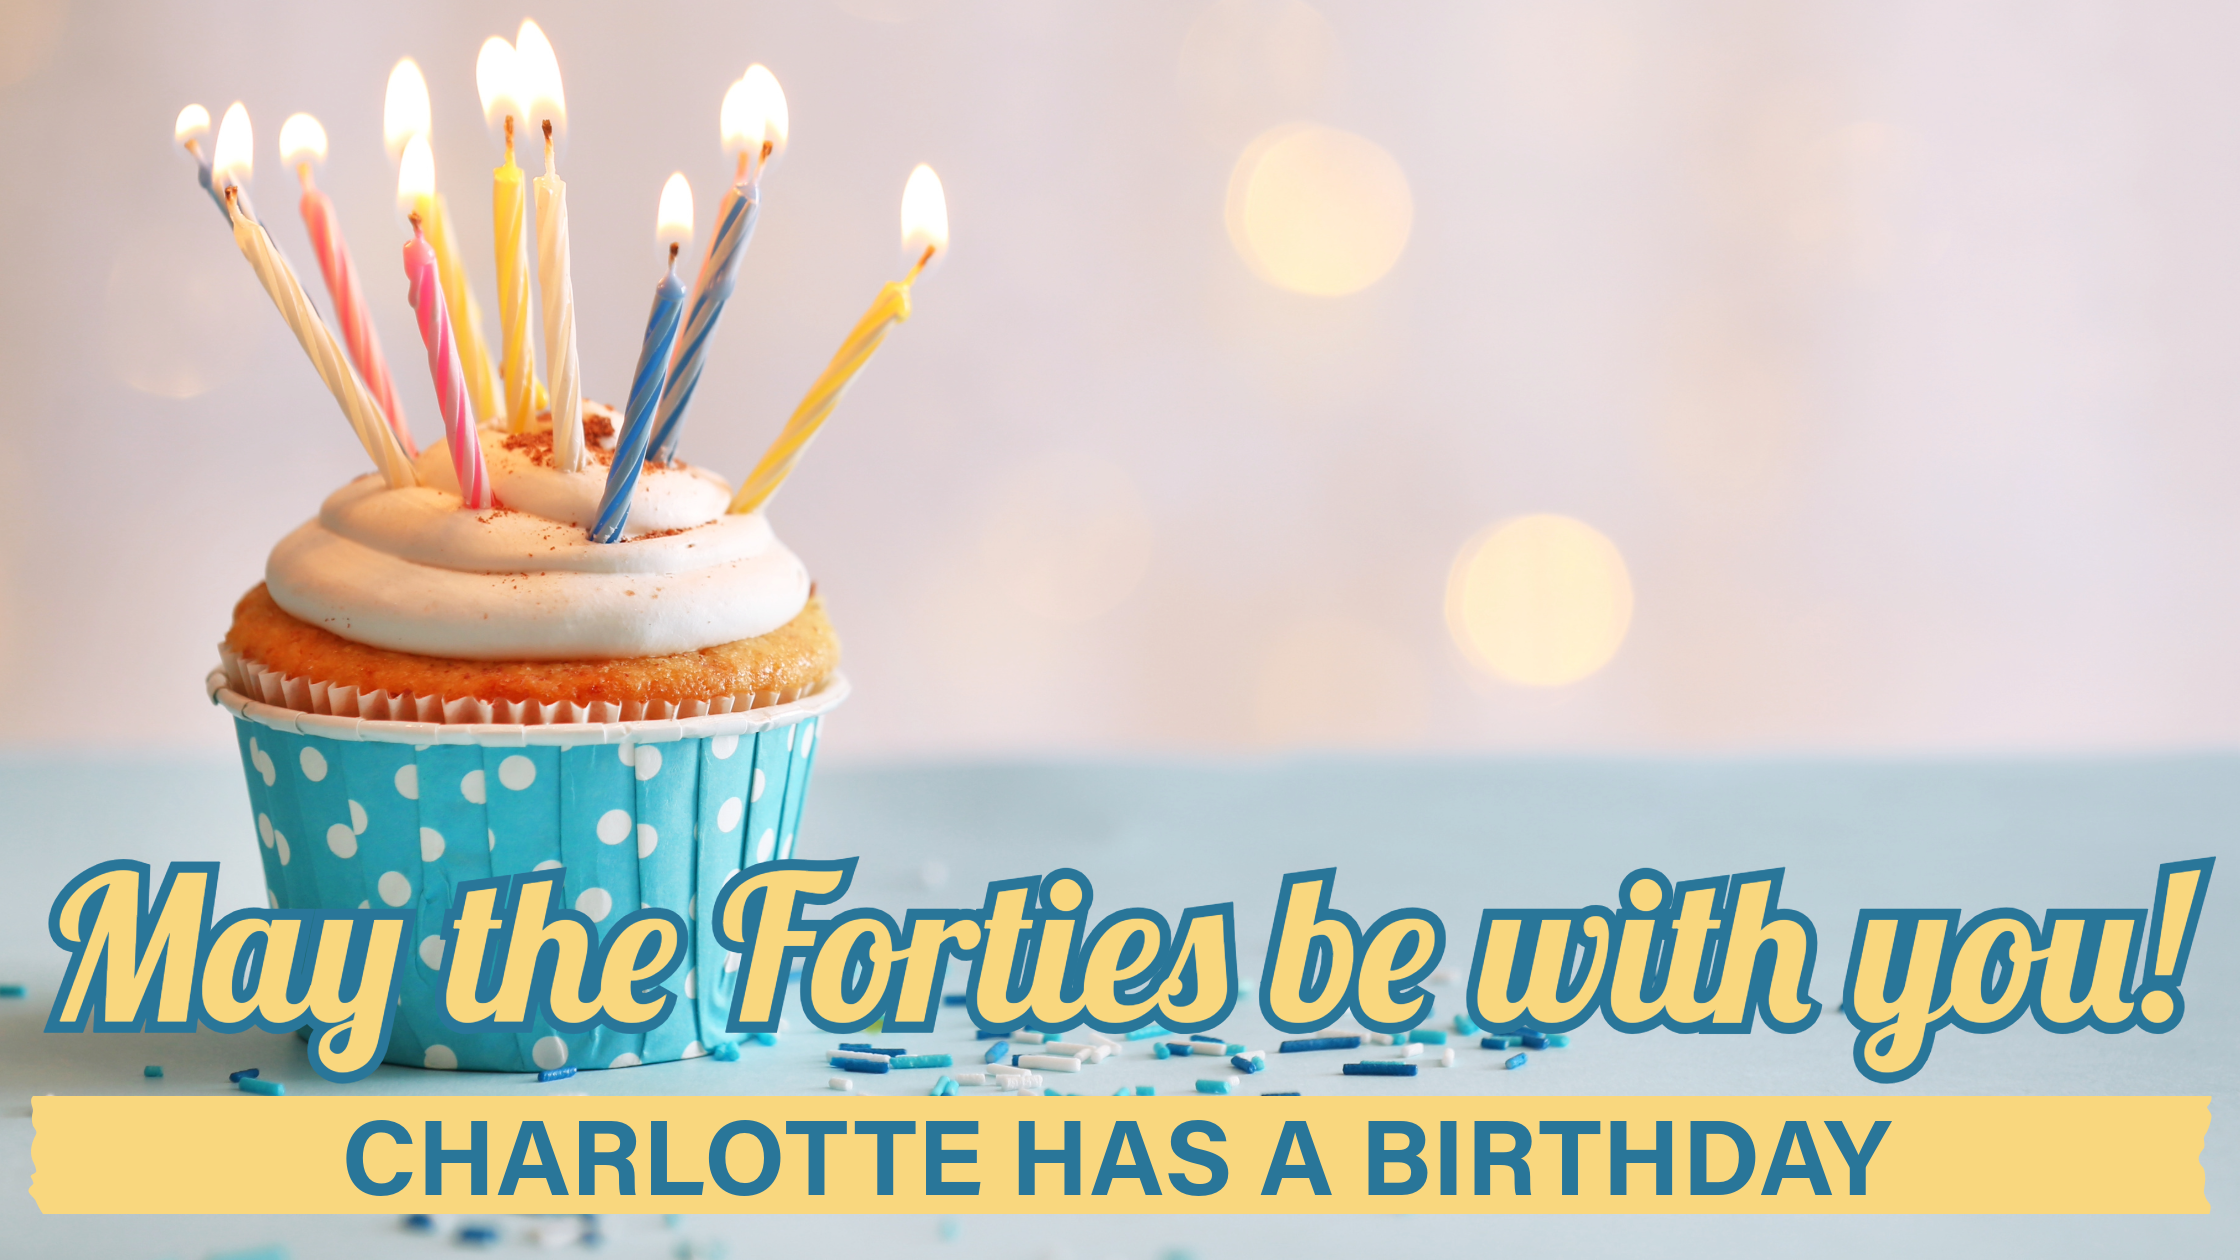 May the Forties be with You: Charlotte has a birthday